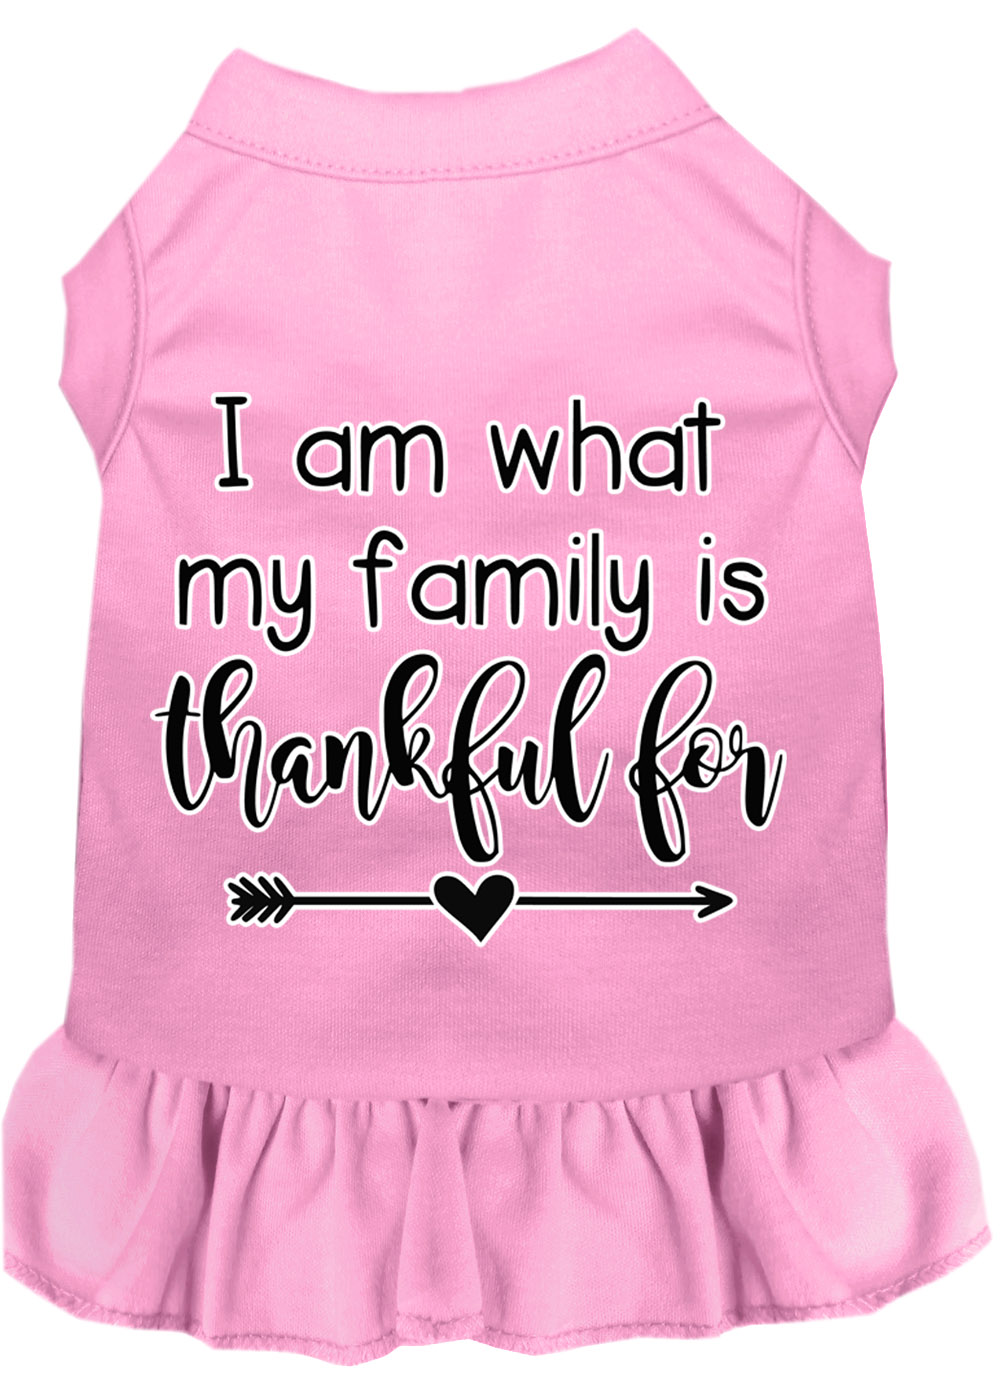 I Am What My Family is Thankful For Screen Print Dog Dress Light Pink 4X